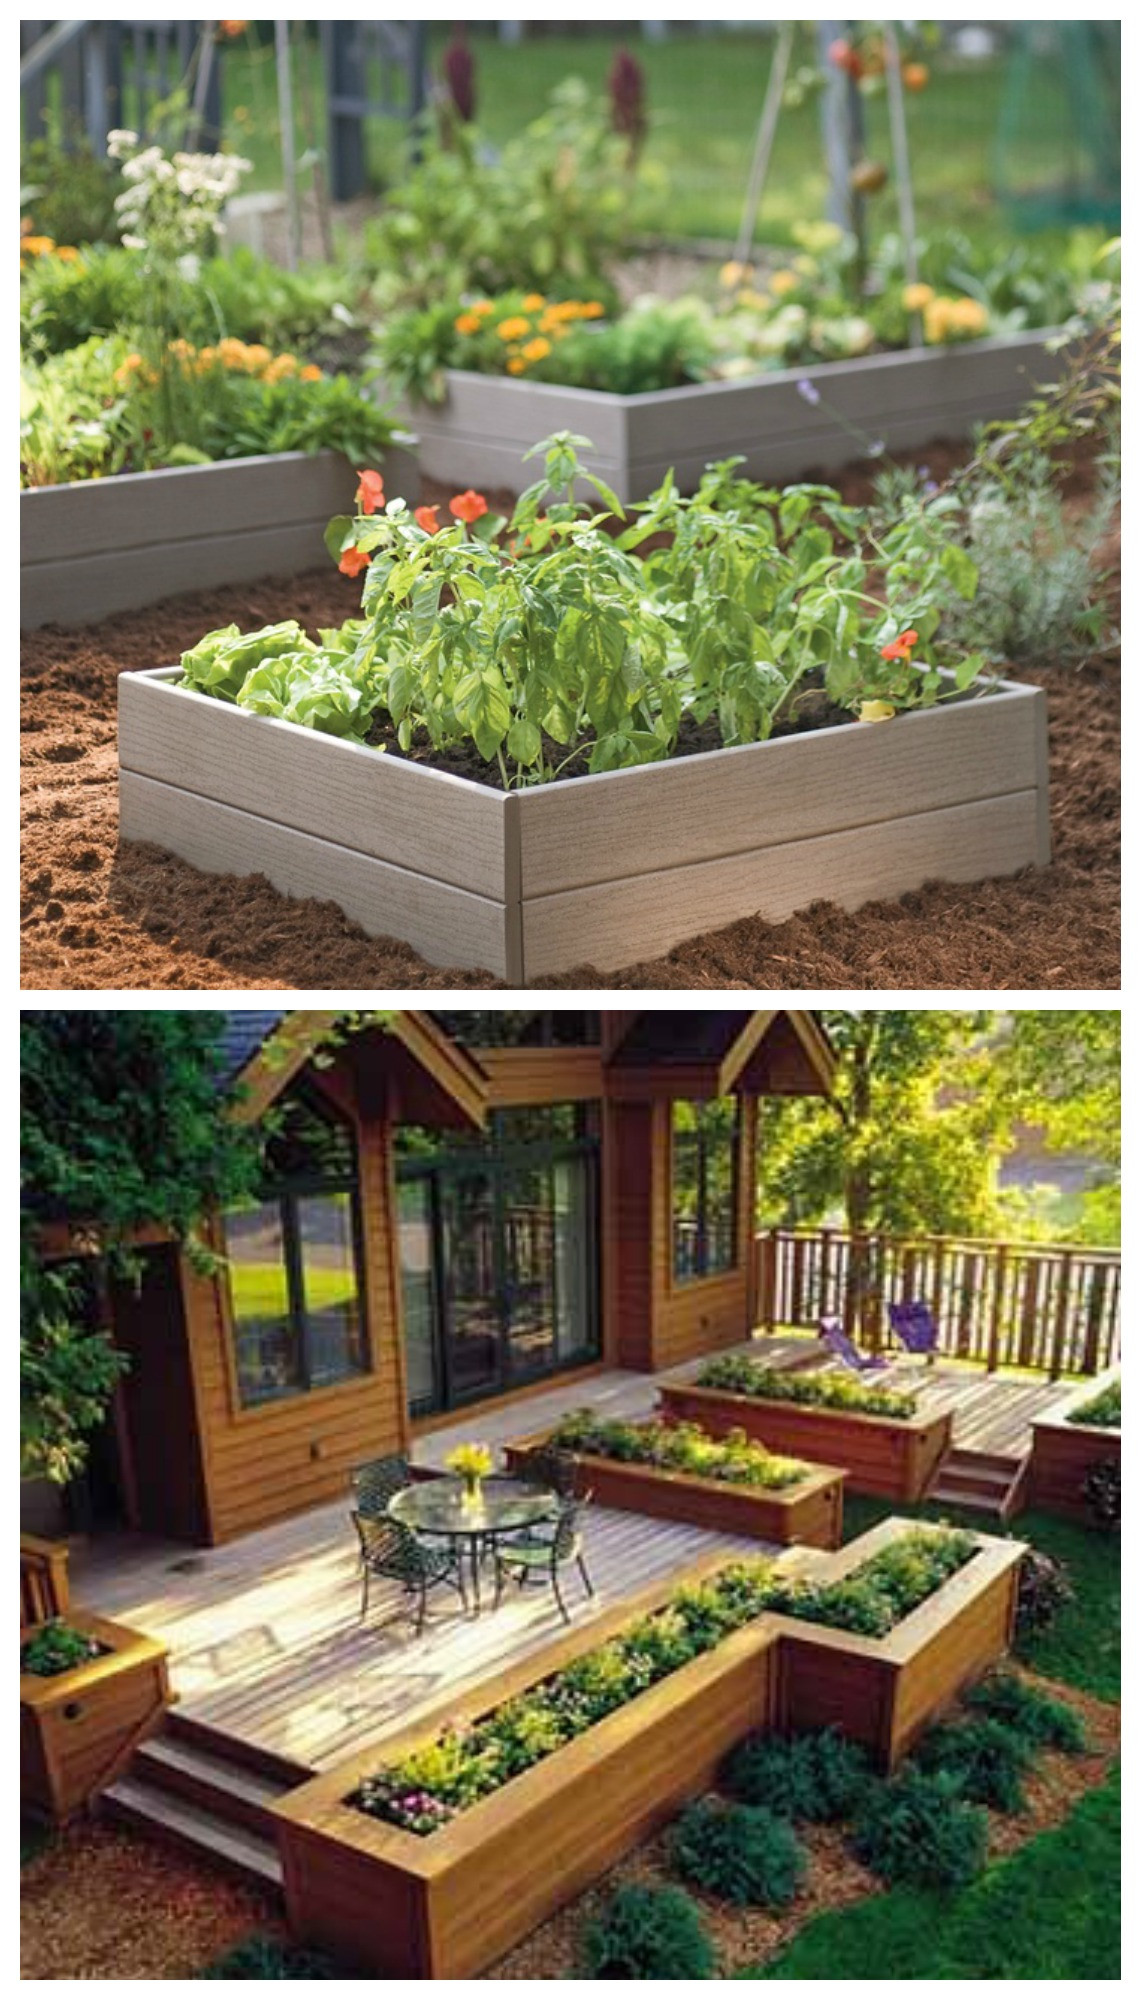 Outdoor Landscape Diy
 DIY Garden Projects For The Perfect Backyard